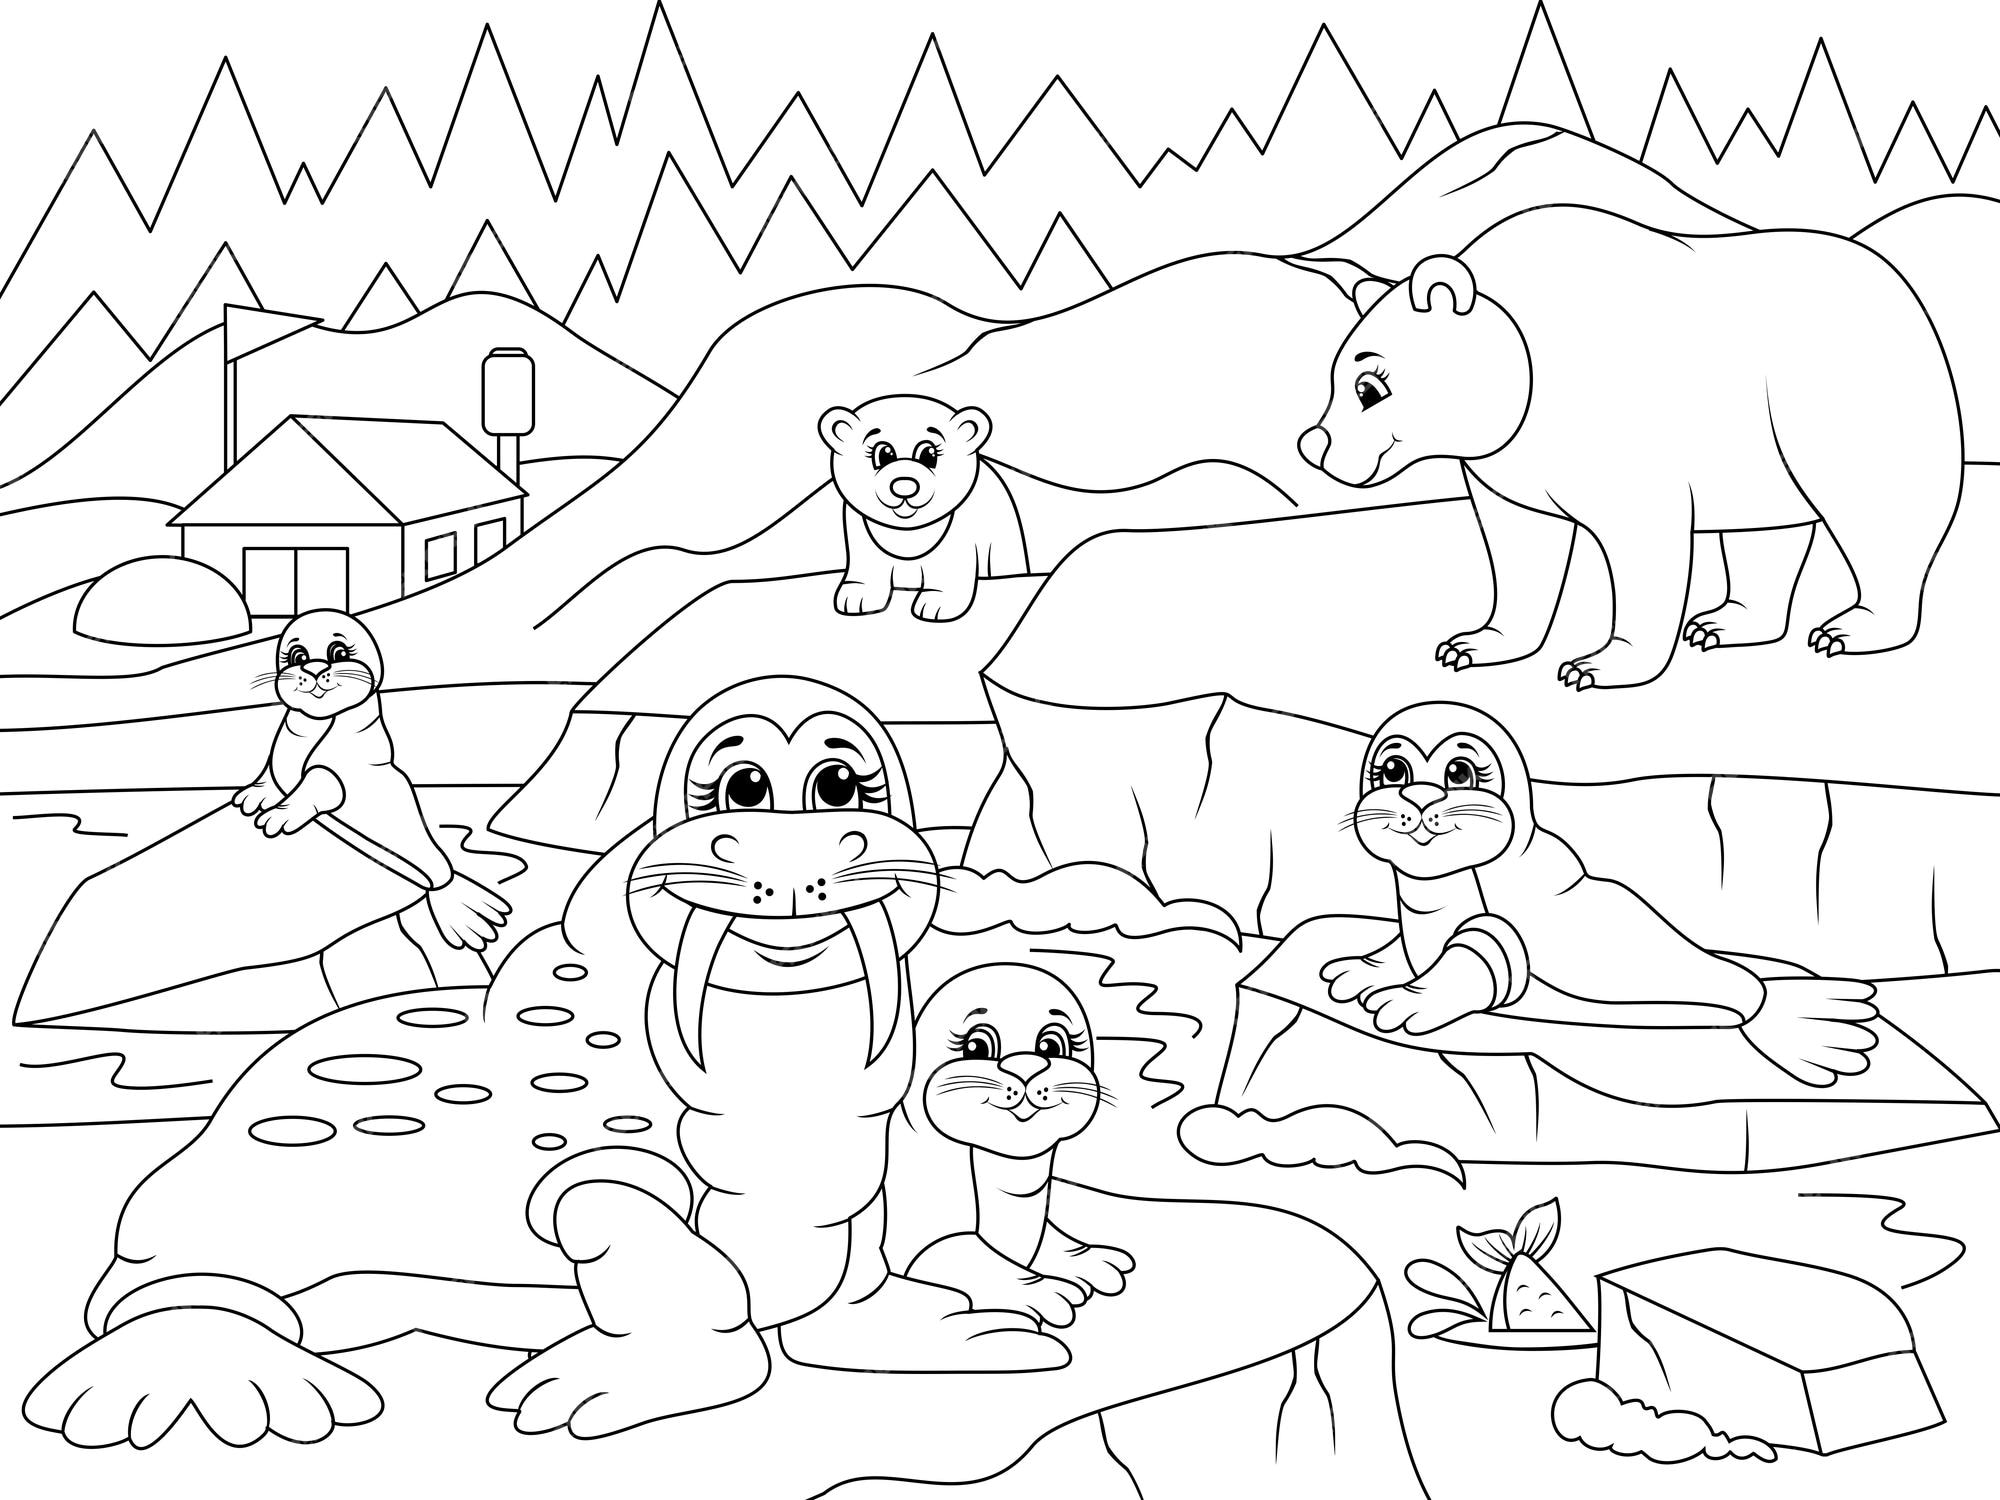 Premium vector north pole landscape and wild animals vector page for printable children coloring book